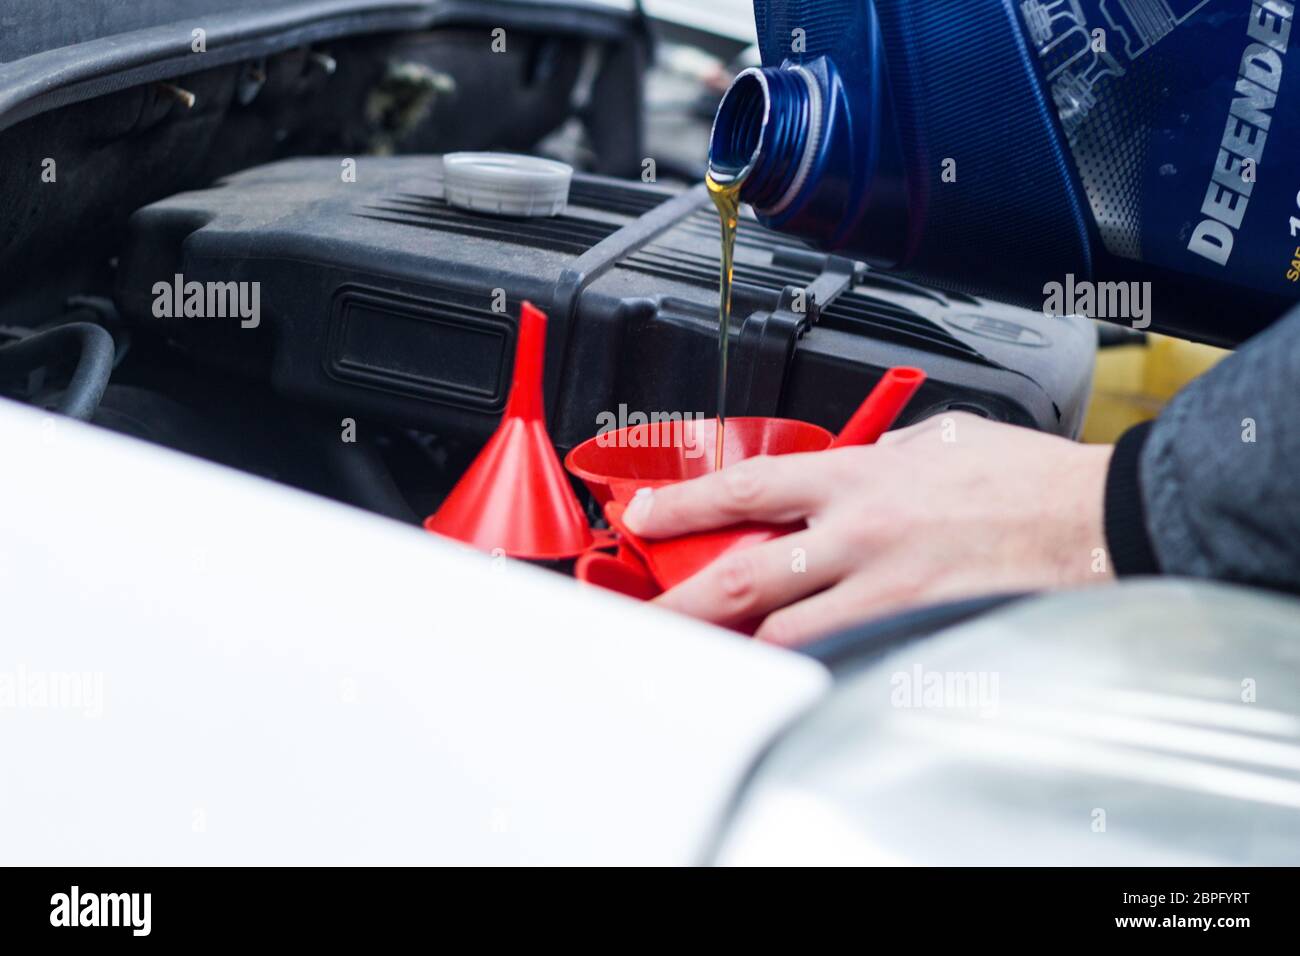 Man uses a red funnel to fill the engine oil in a car with a blue canister. Mechatronic oil level expert e-mobility Stock Photo